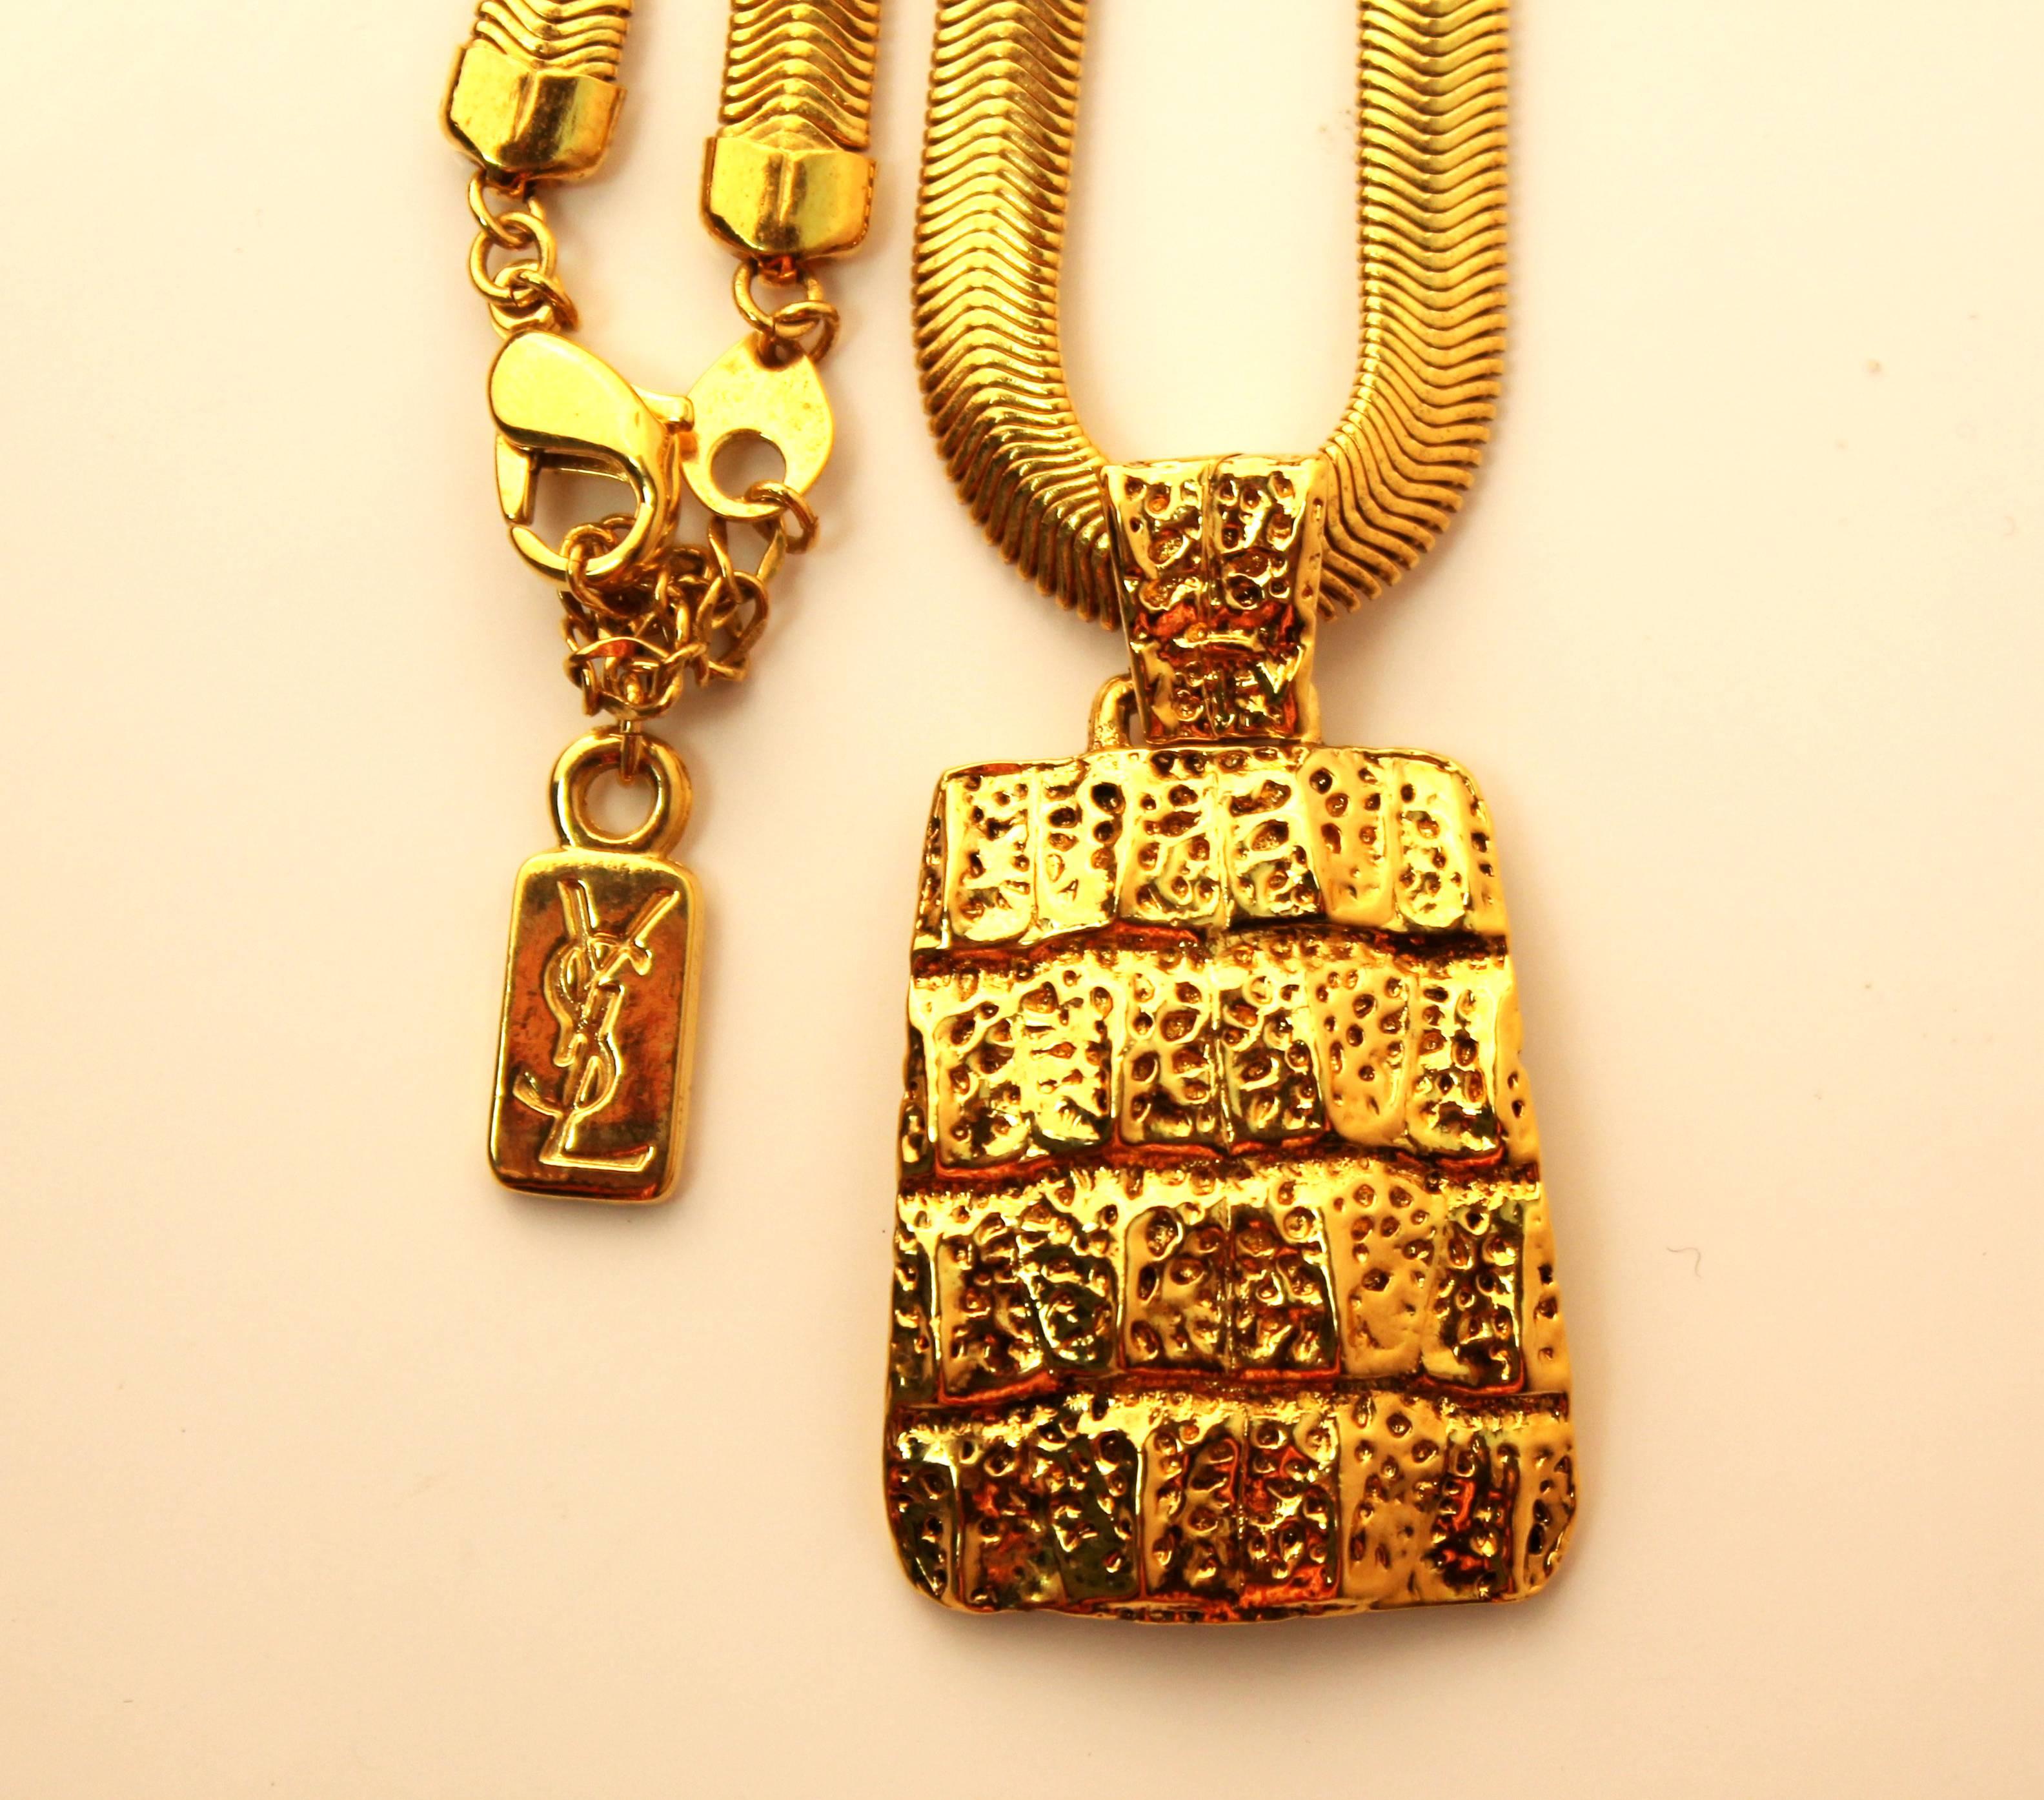 Classic vintage Yves Saint Laurent necklace with a rectangular-shaped hanging pendant. Features a crocodile  texture and a flat serpentine chain. Comes with original box.